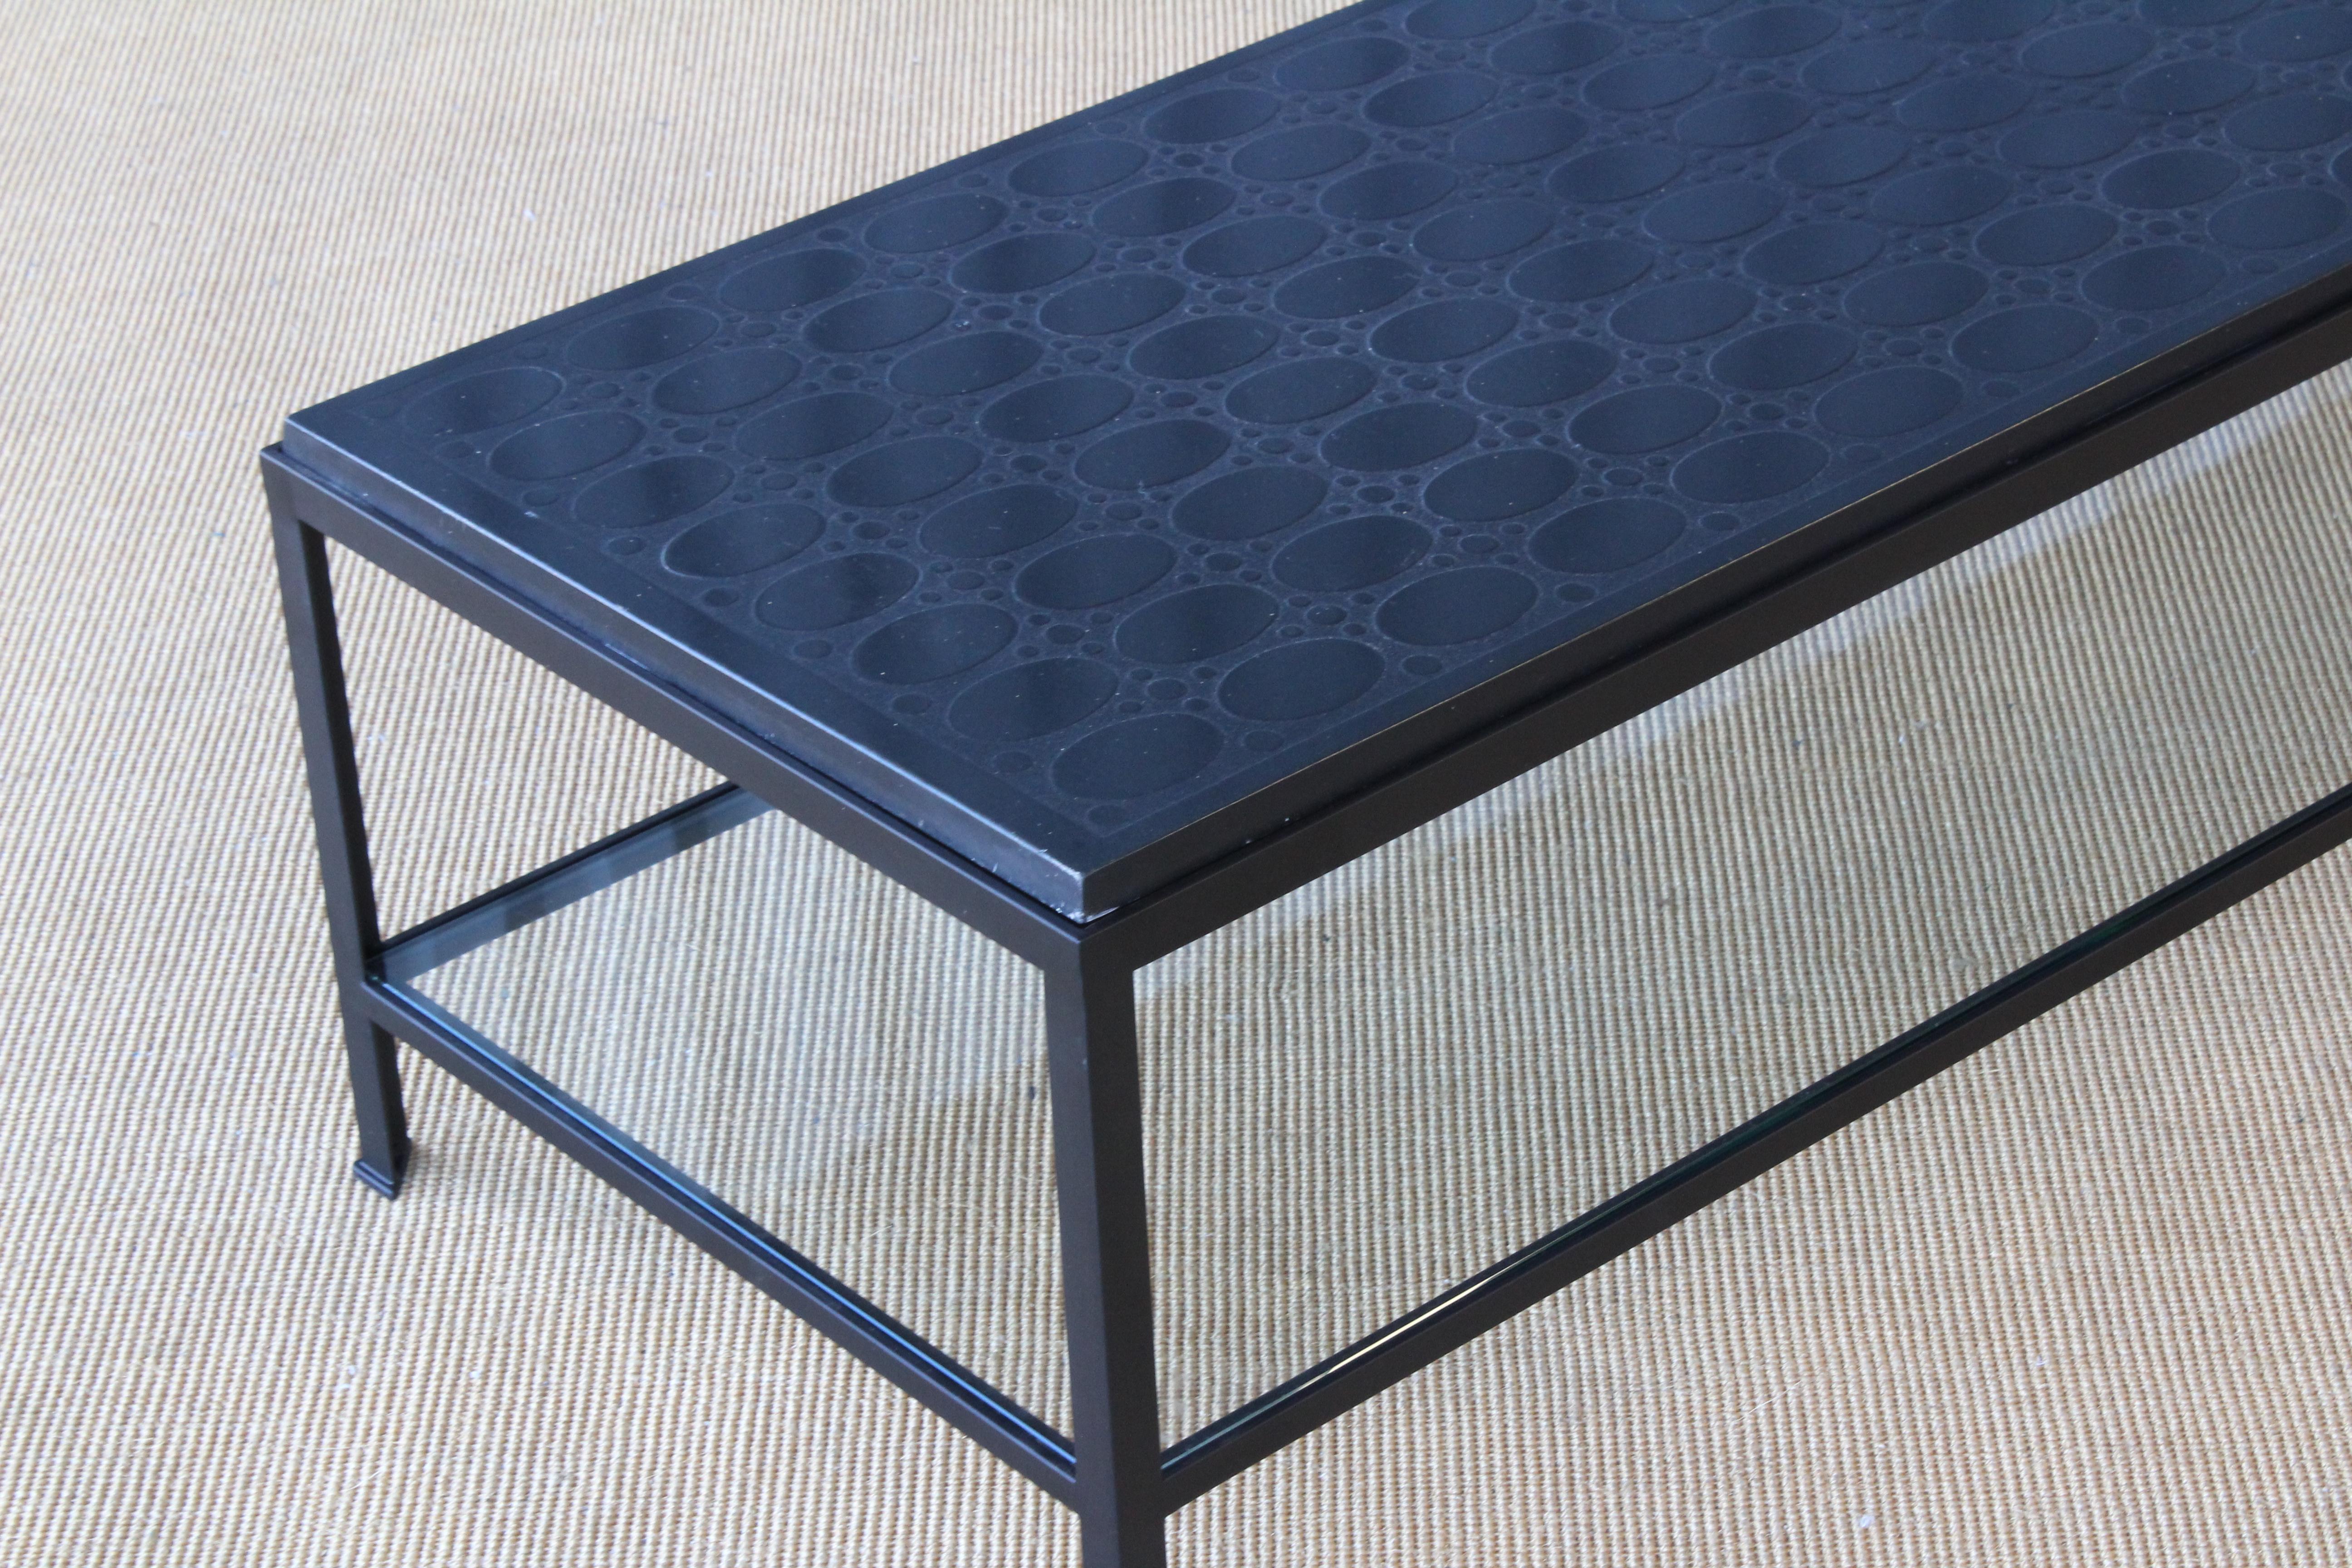 Powder-Coated Etched Stone Coffee Table on Steel Base, France, 1950s.